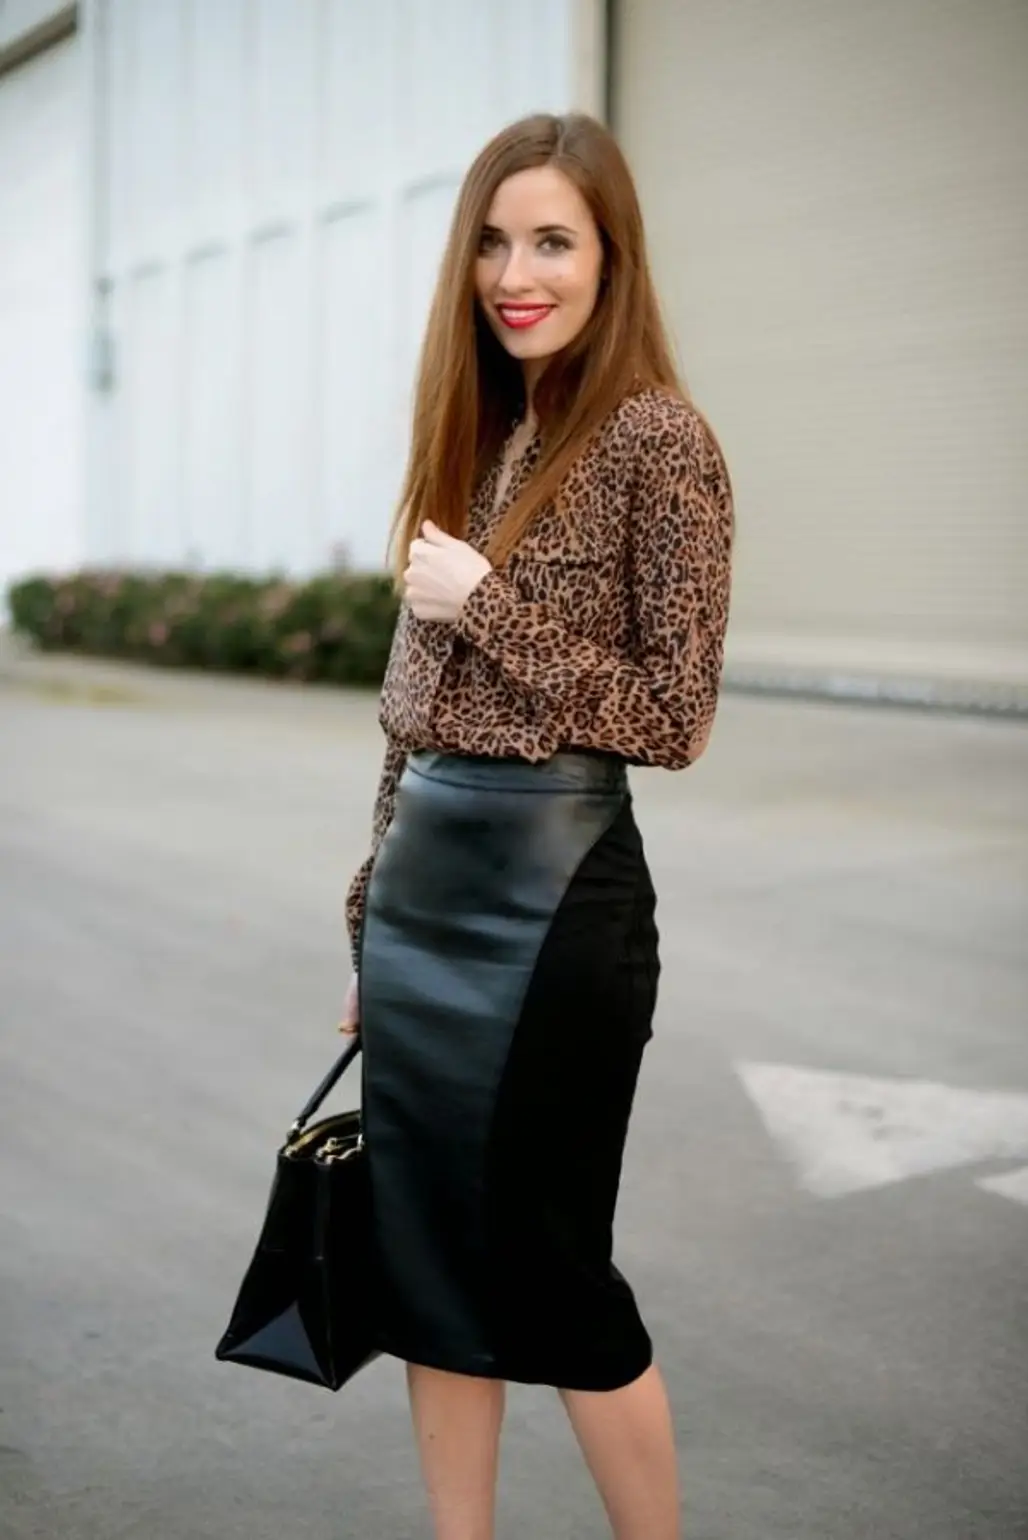 Edgy Pencil Skirt + Blouse Combo